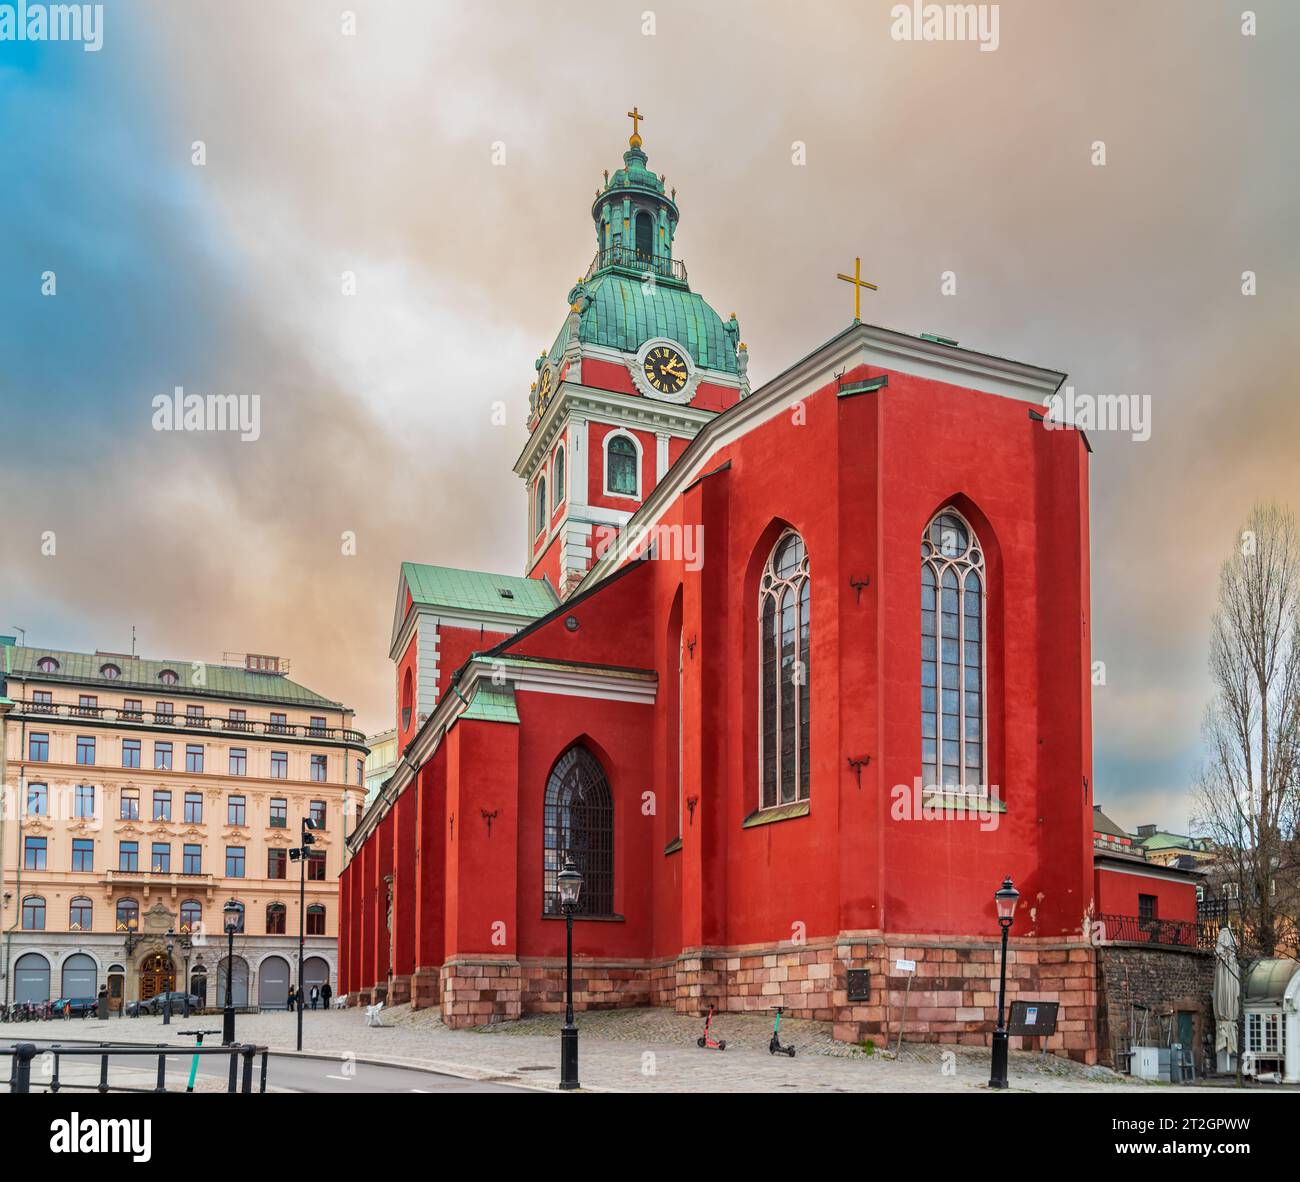 St JJames church (Sankt Jacobs kyrka) in the old city center of Stockholm, Sweden. The church took a long time to complete. Therefore it includes seve Stock Photo